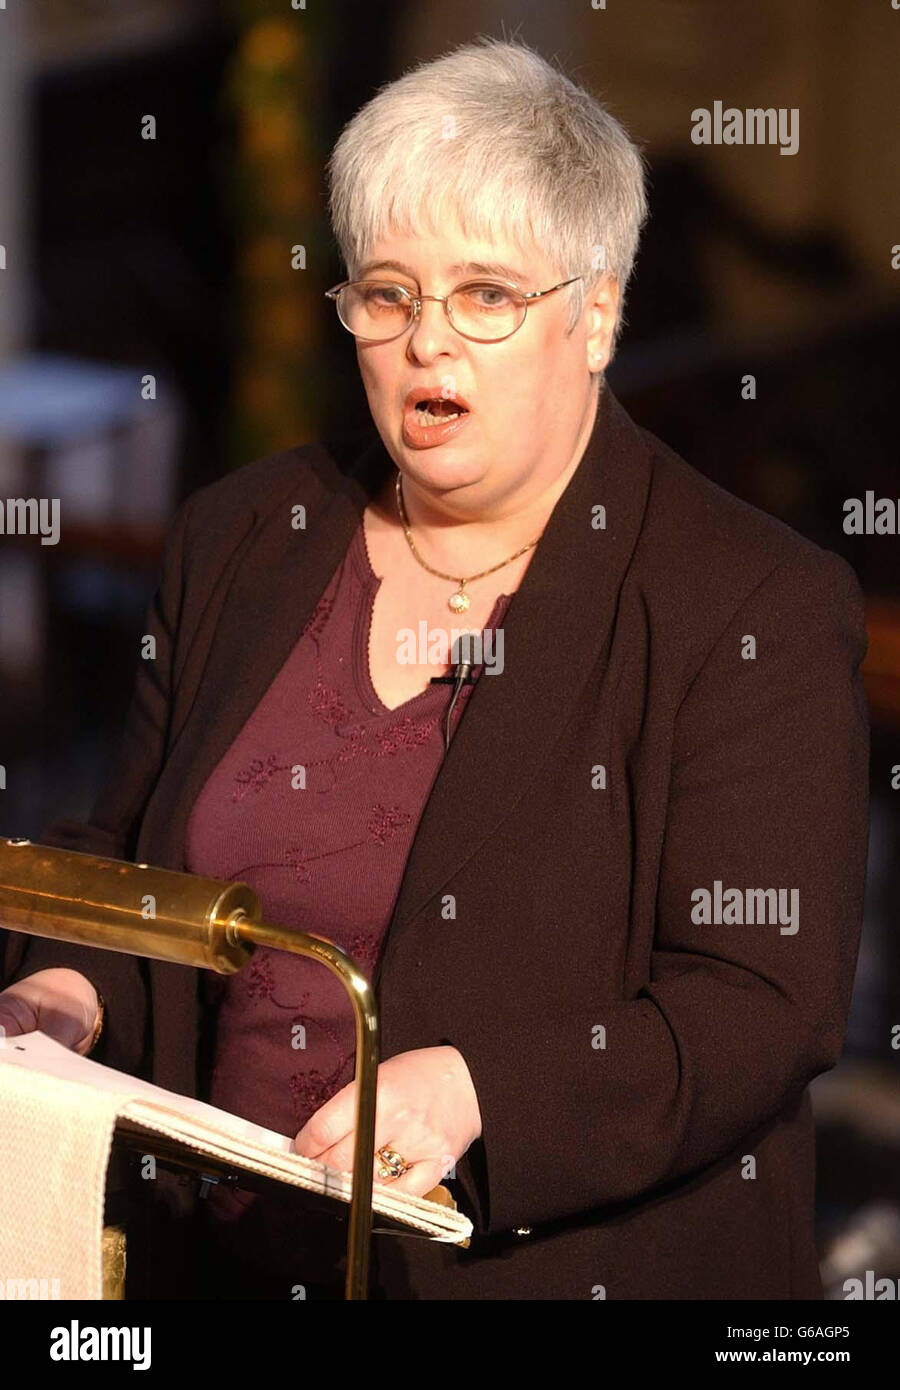 Barbara Roche MP Minister of State, reads a message from the Government during the memorial service on the 10th anniversary of South London teenager Stephen Lawrence's murder, at St Martins-in-the-Fields Church Trafalgar Square, Central London. Stock Photo